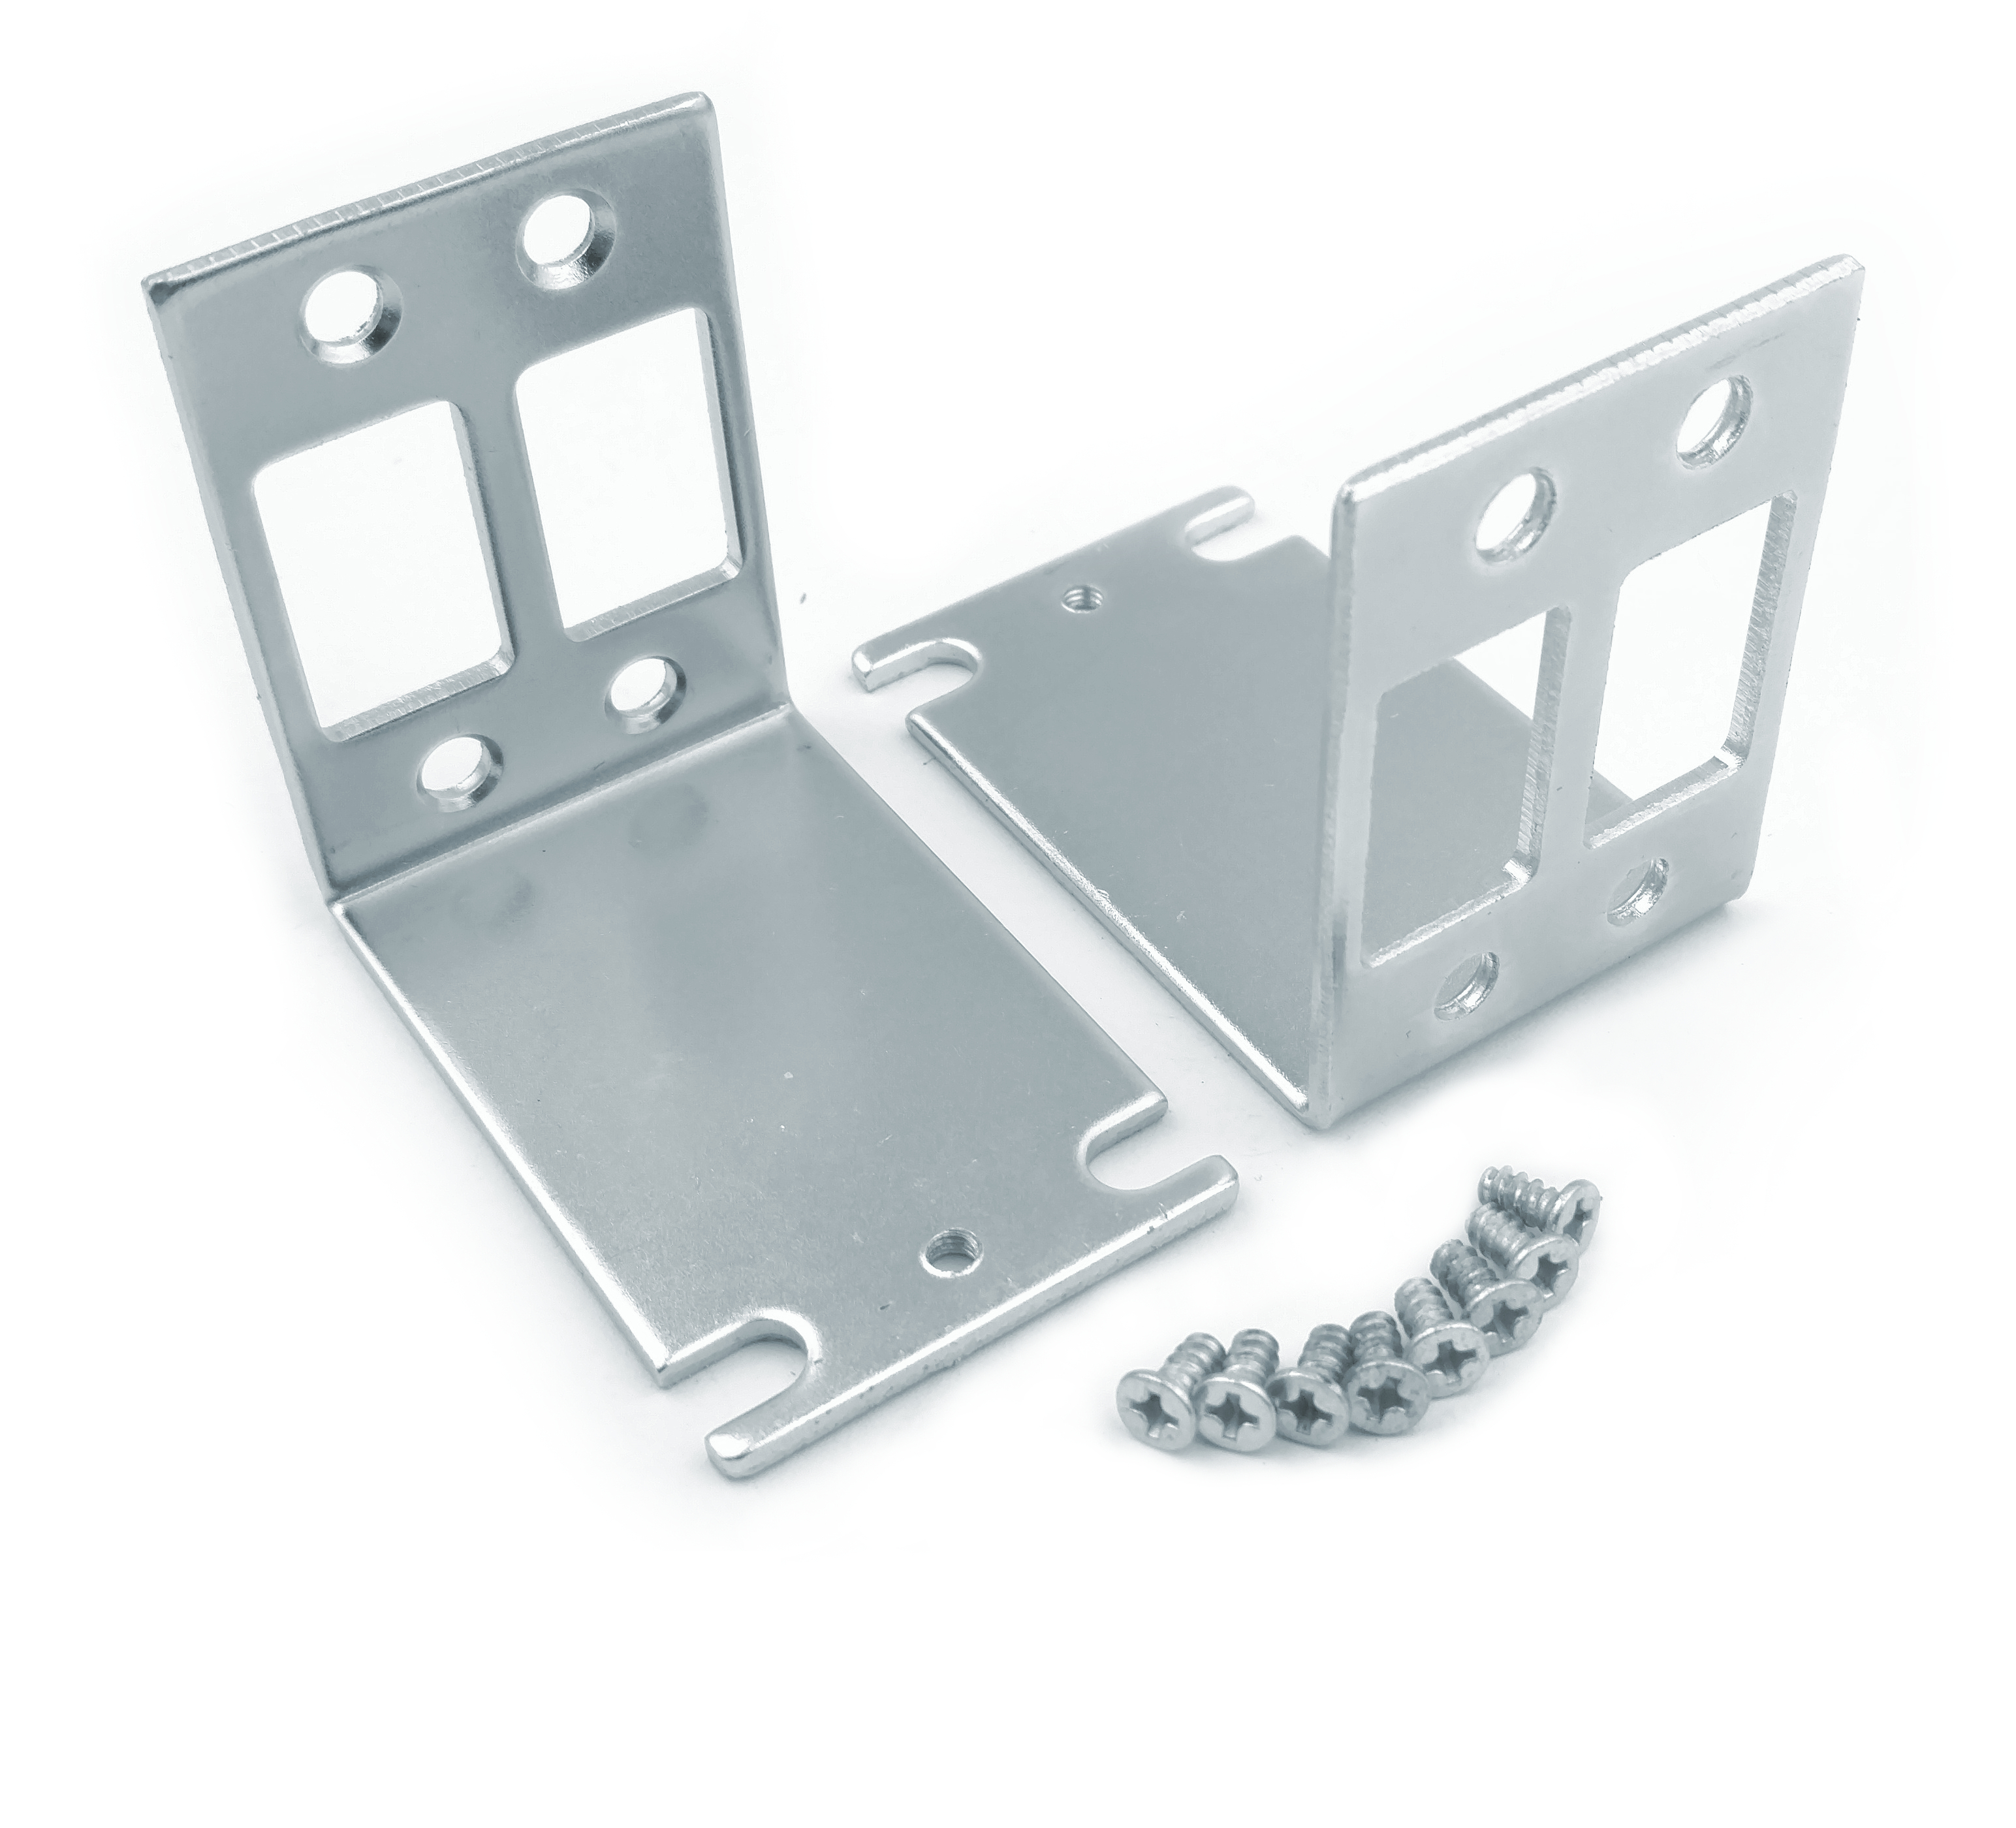 19" Rack Mount Kit for Cisco 1841 - Click Image to Close